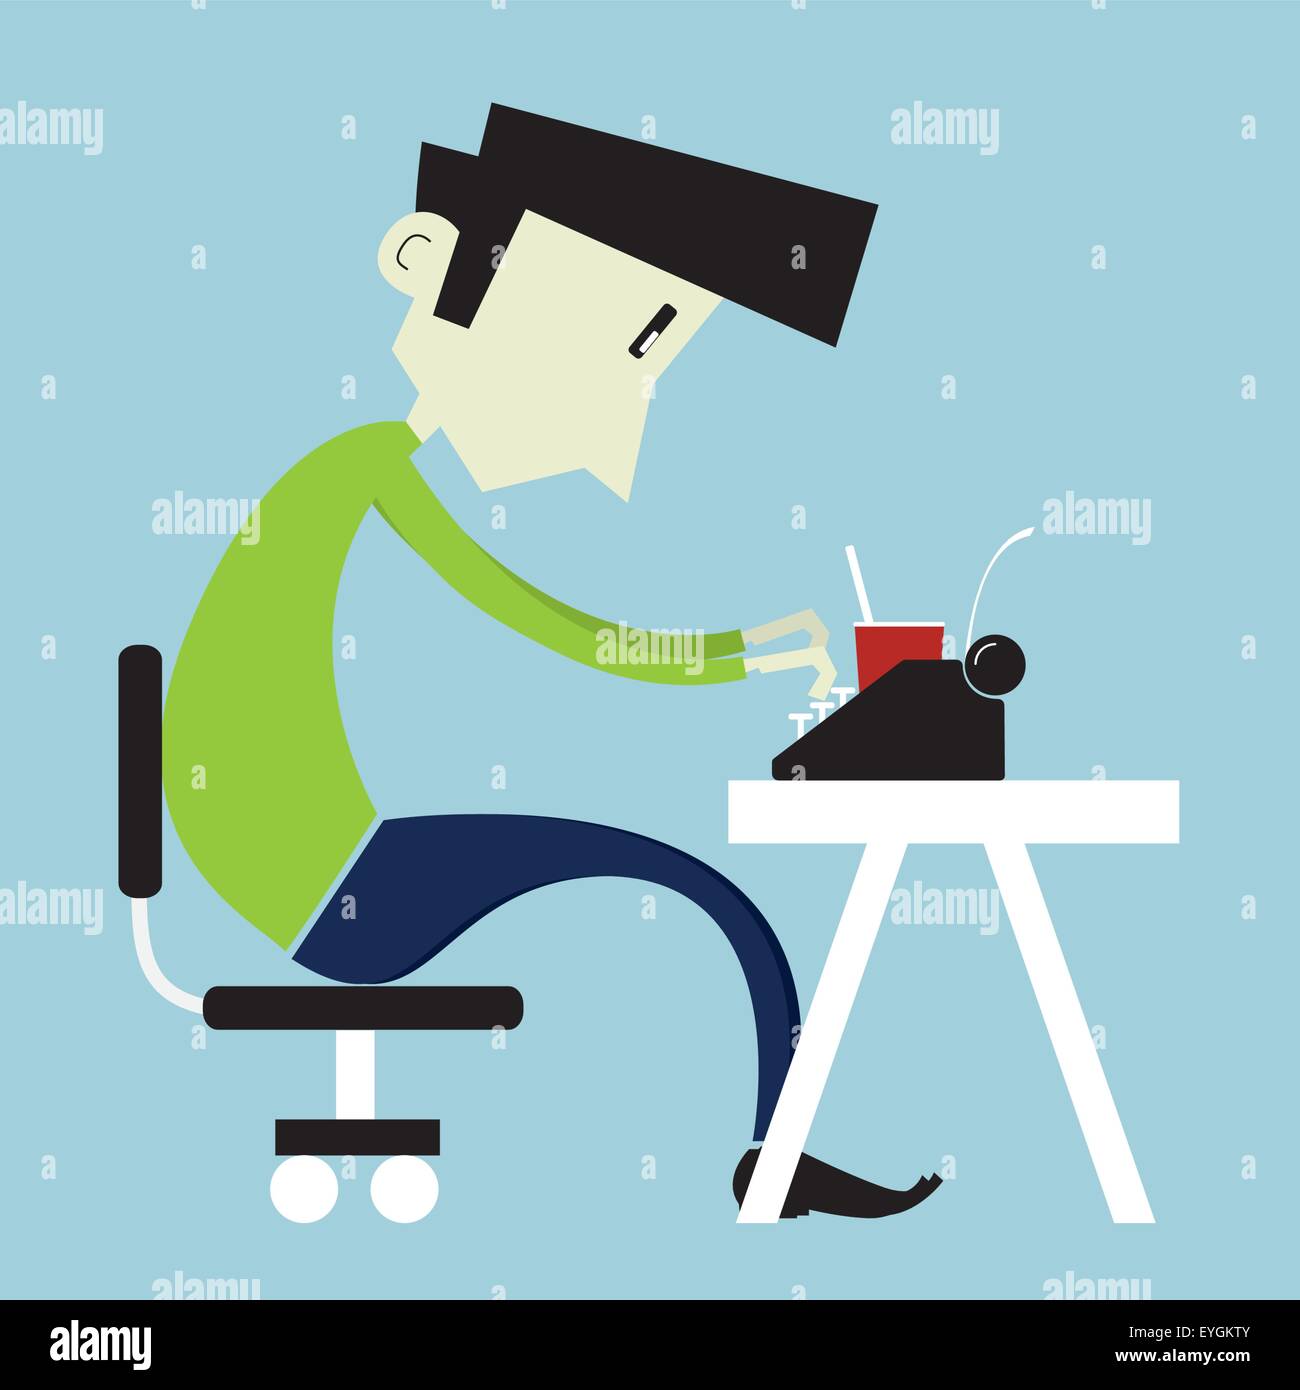 Young boy typing on a typewriter - Flat vector style illustration. Stock Vector